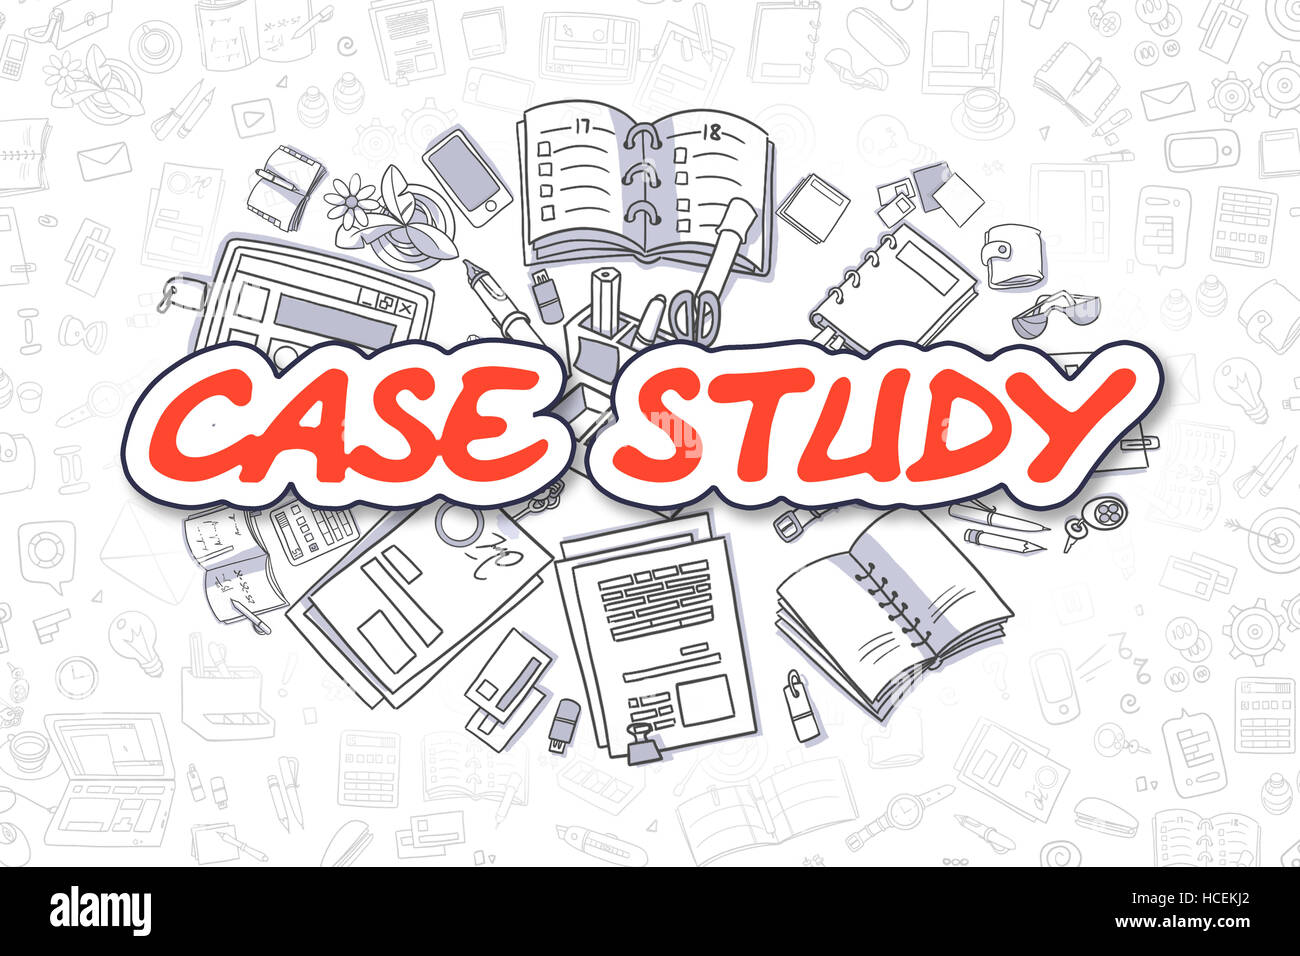 Case Study - Doodle Red Word. Business Concept. Stock Photo